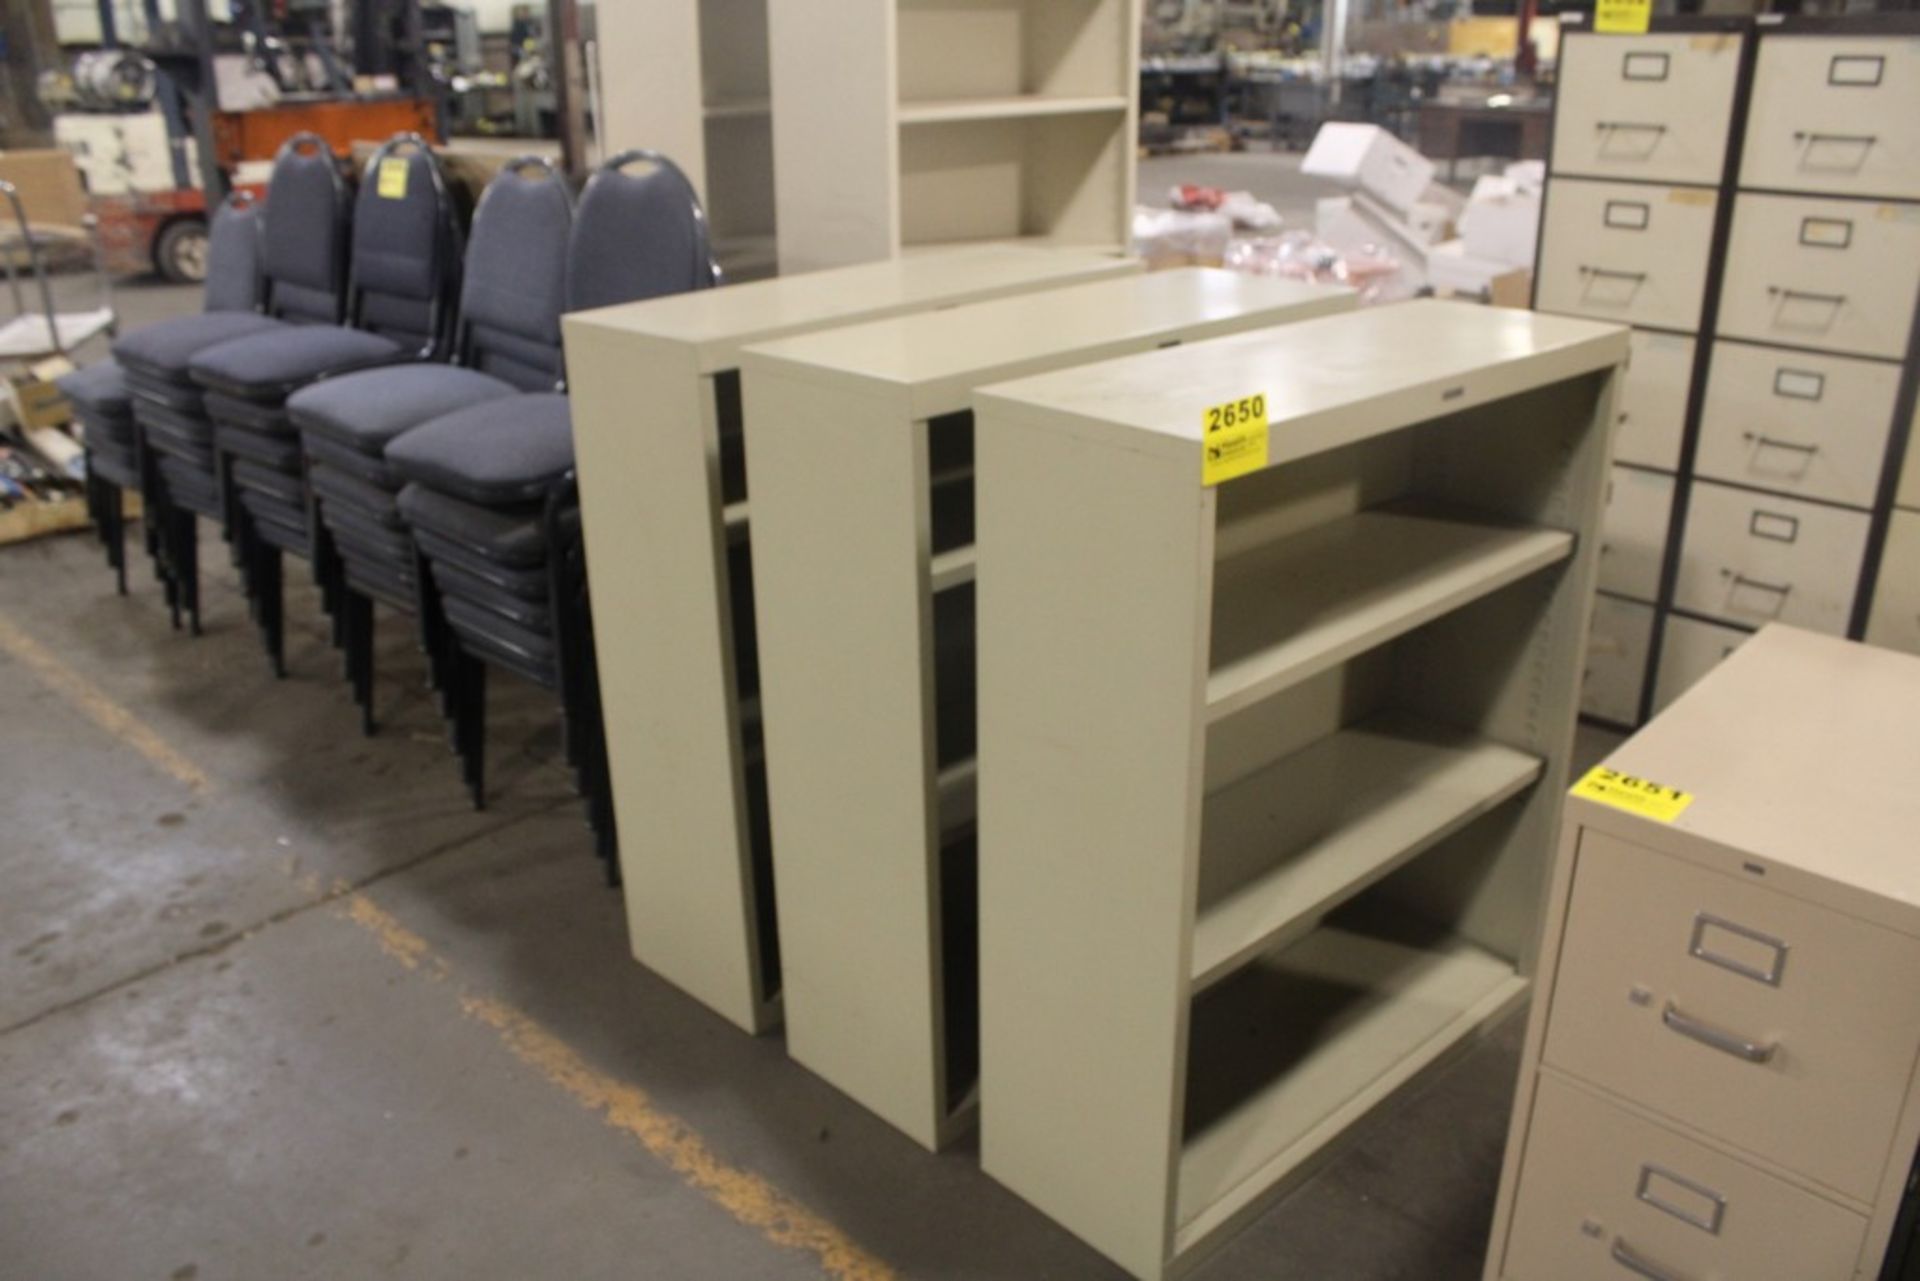 (3) ANDERSON HICKEY SHELVING UNITS